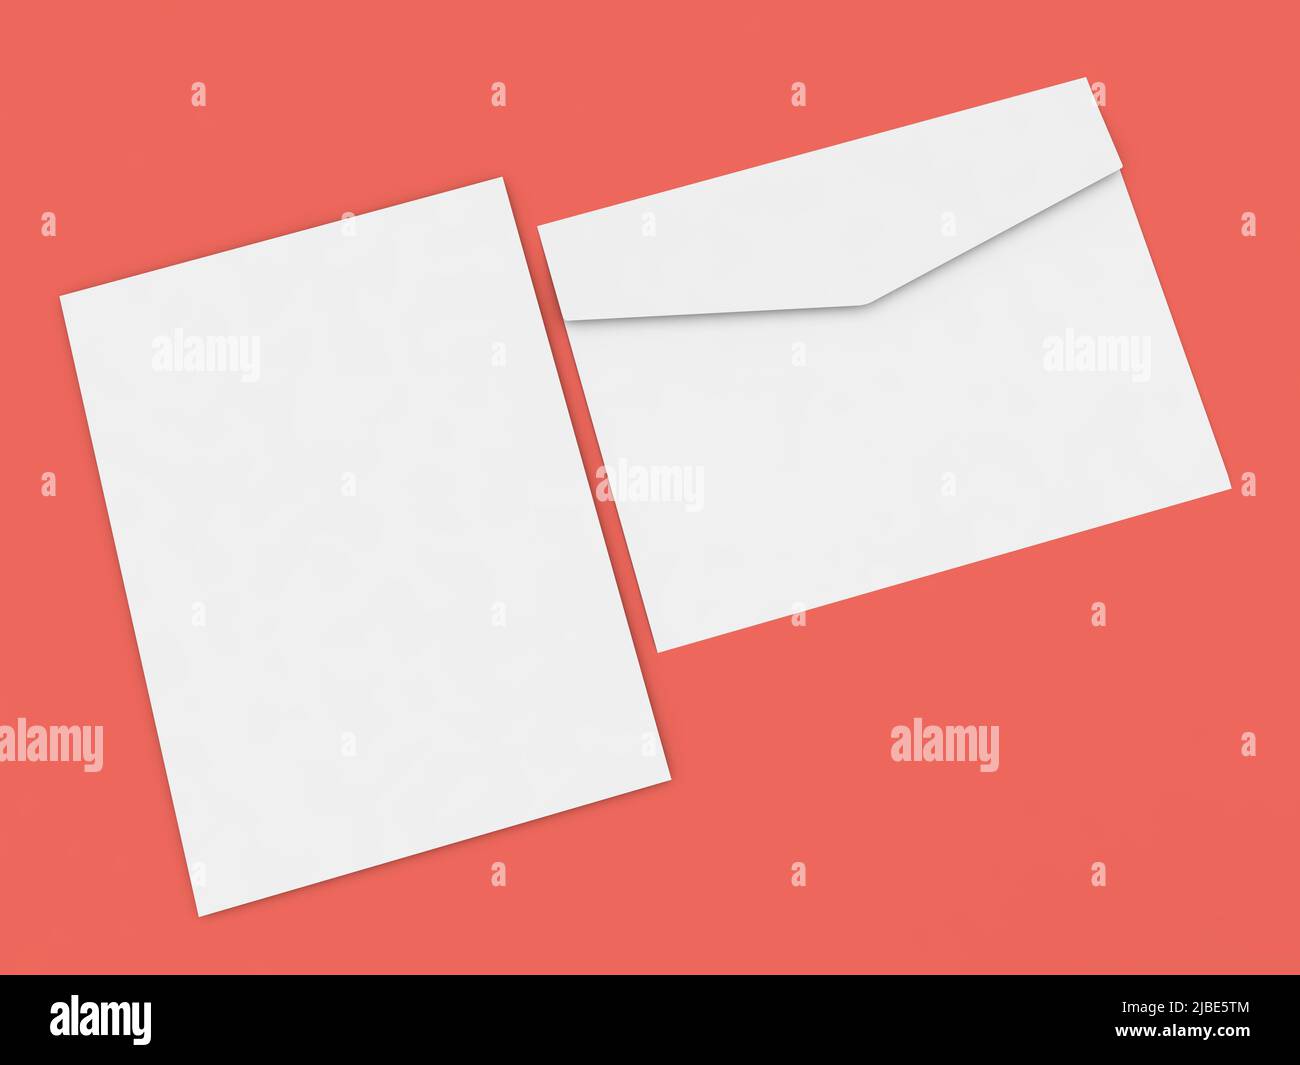 Paper envelope and sheet of a4 paper on a red background. 3d render illustration. Stock Photo